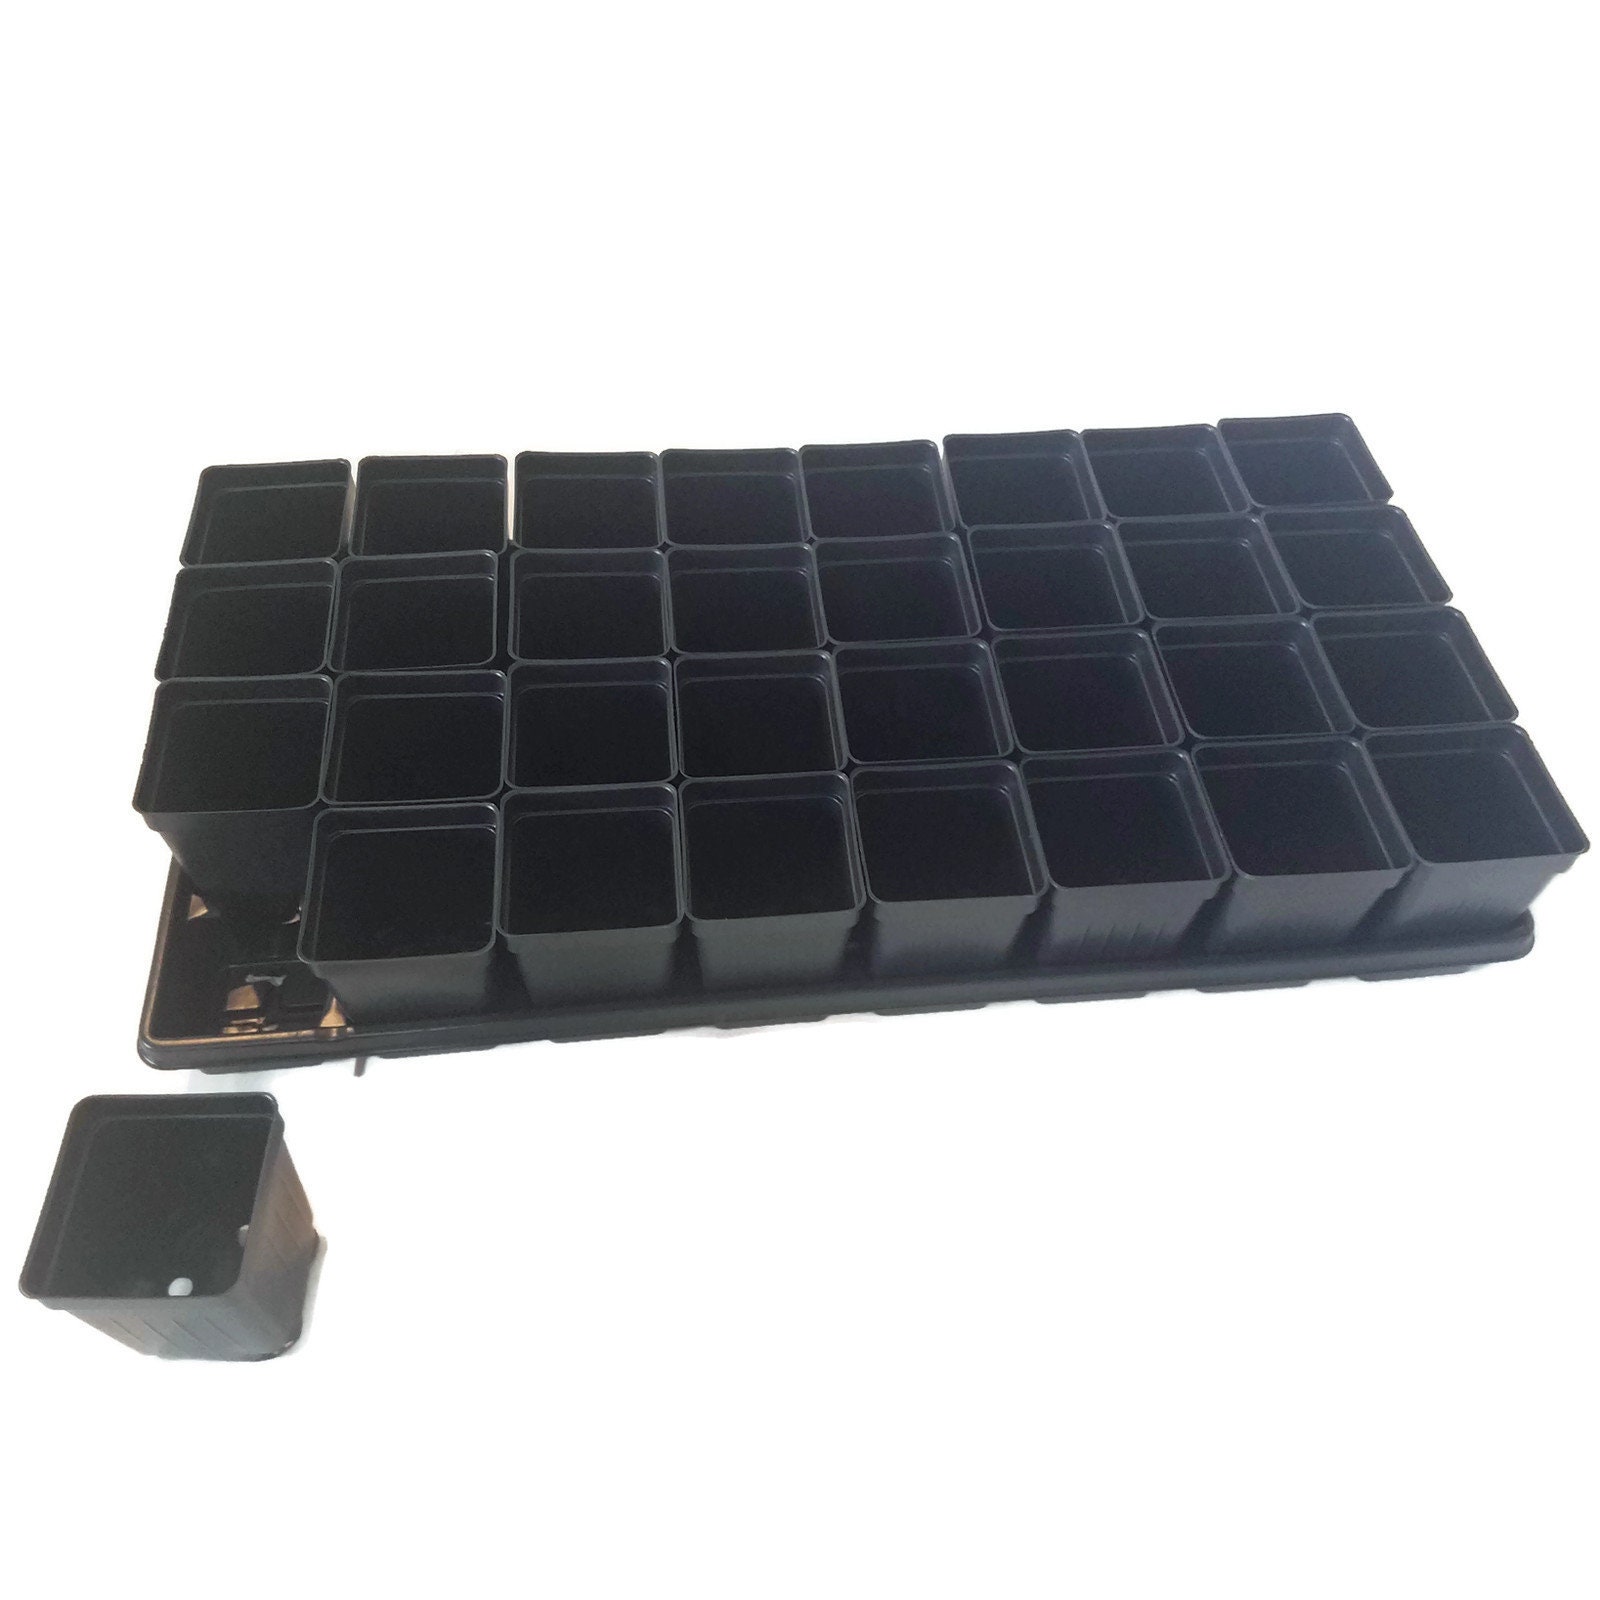 White Plastic Sorting Tray for Diamonds Beads Stones Small Open